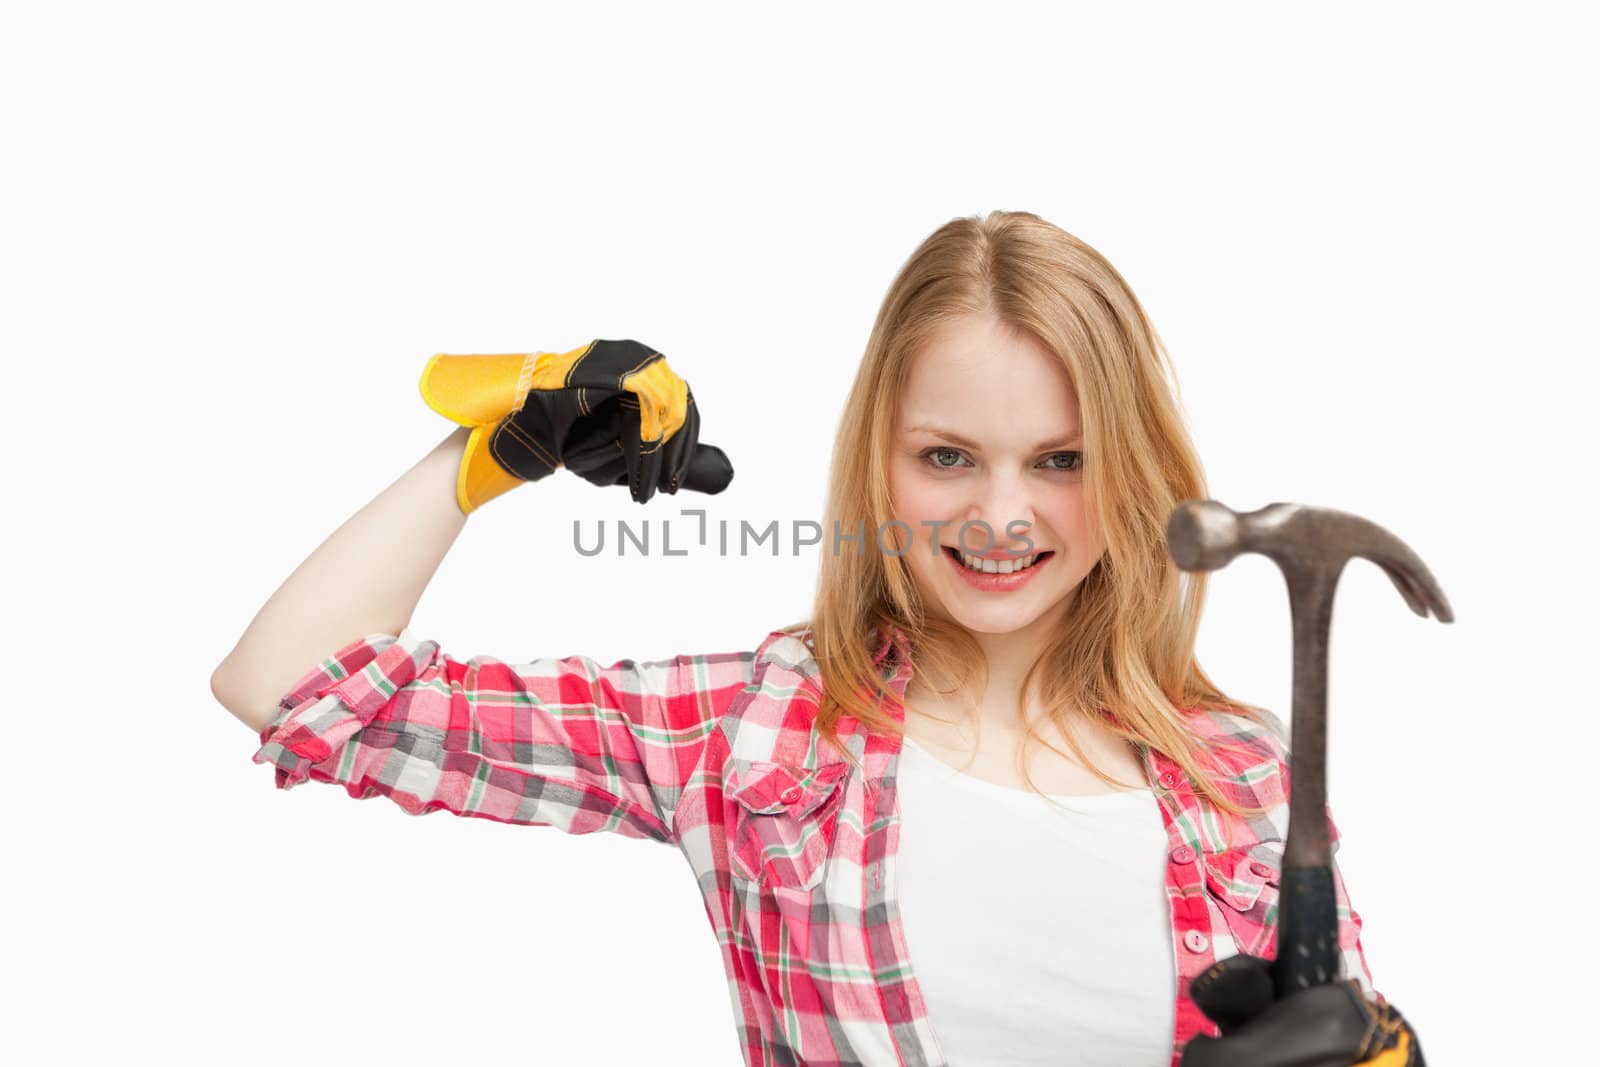 Woman smiling while holding a hammer against white background